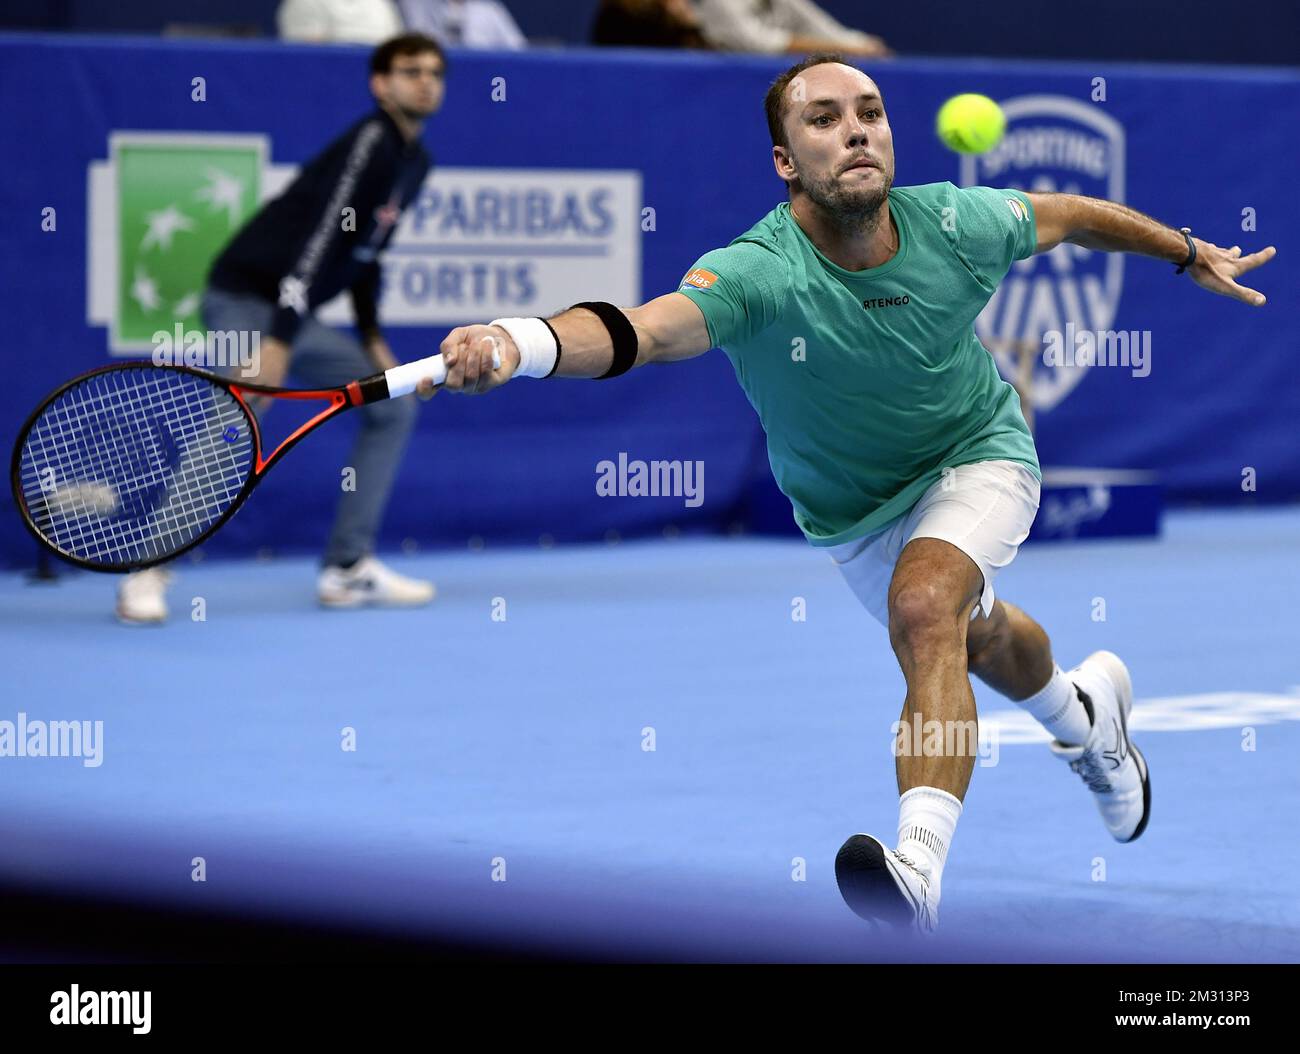 Belgian Steve Darcis plays a game between Belgian Steve Darcis and French  Gilles Simon, a men's singles first round match at the European Open ATP Antwerp  tennis tournament, Tuesday 15 October 2019